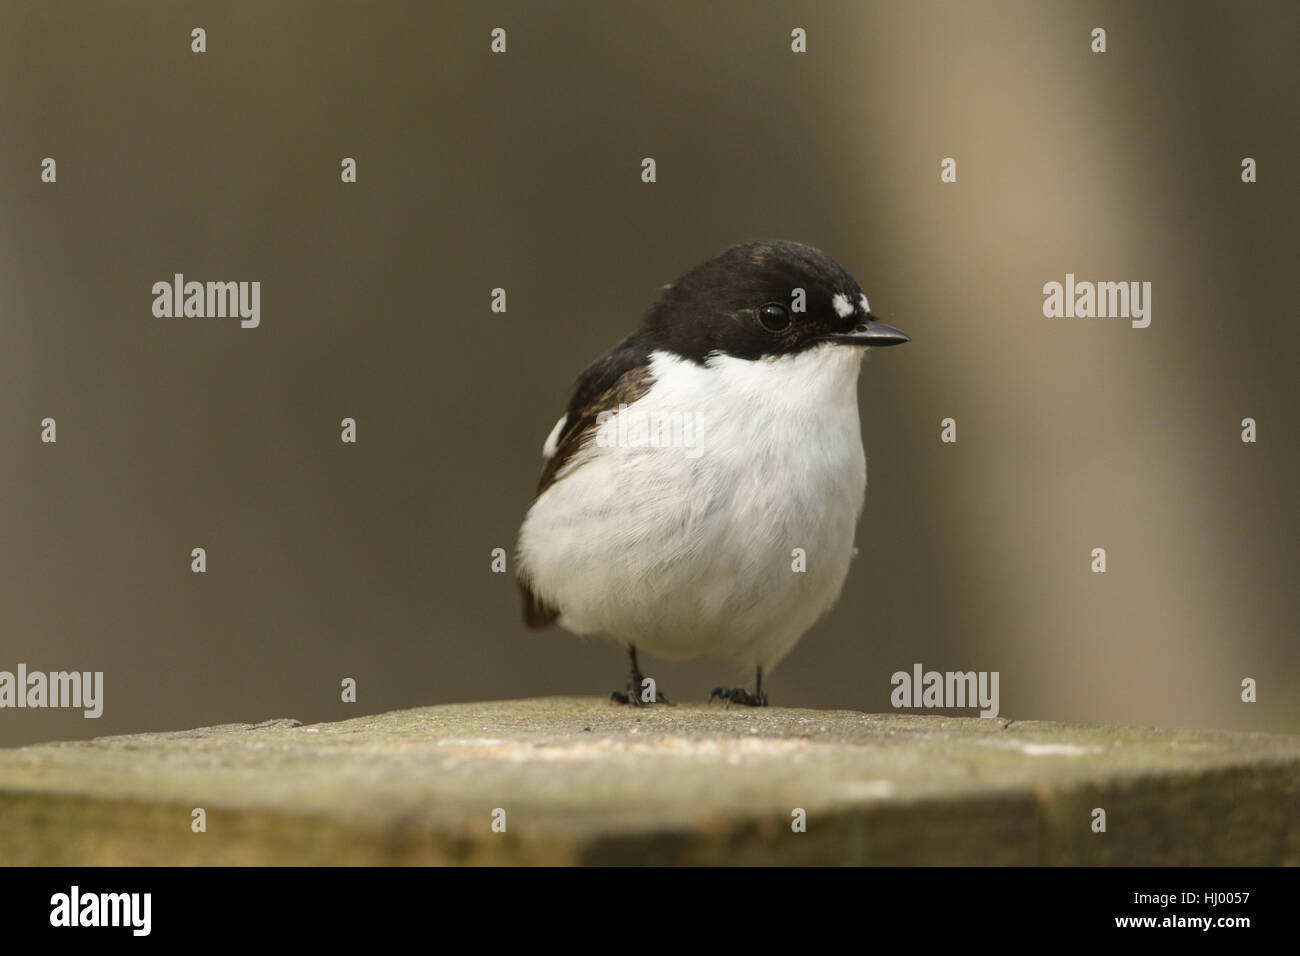 A rare male Pied Flycatchers (Ficedula hypoleuca) perched on a wooden post. Stock Photo